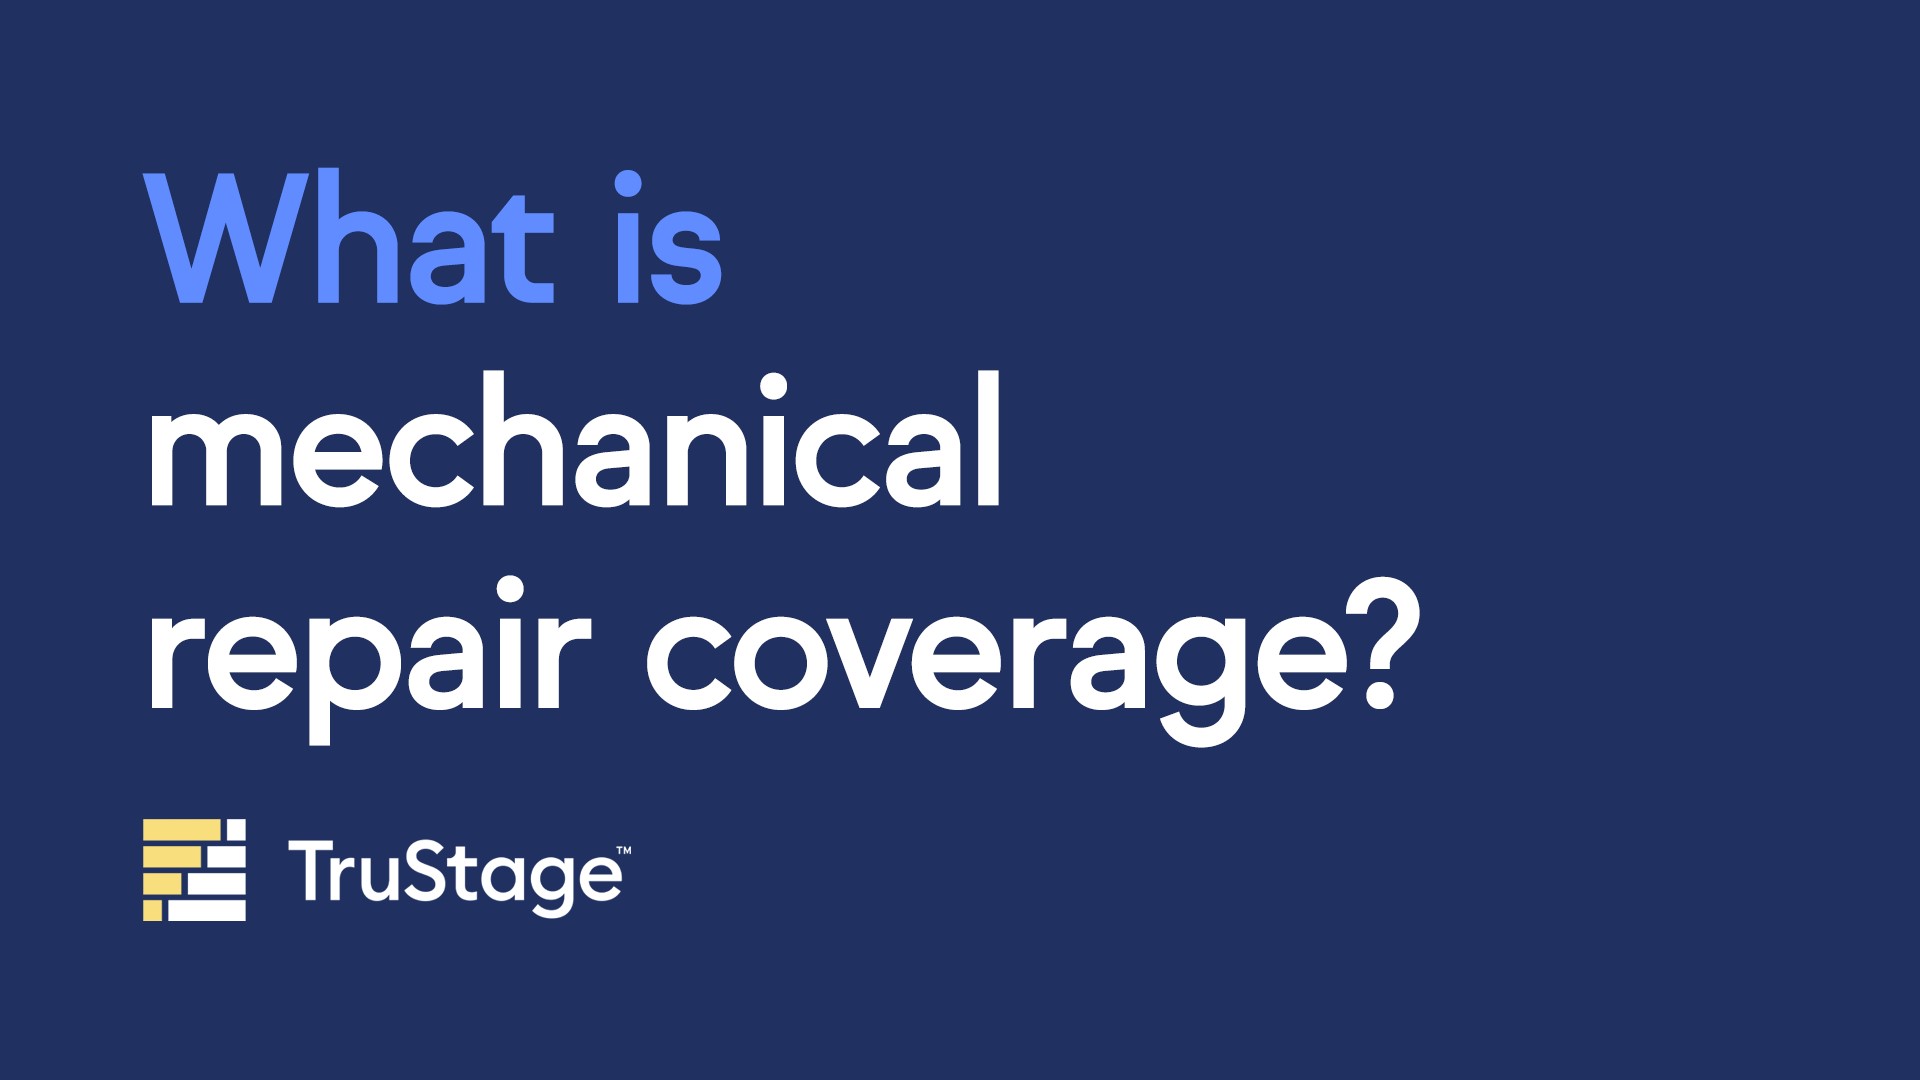 What is mechanical repair coverage?